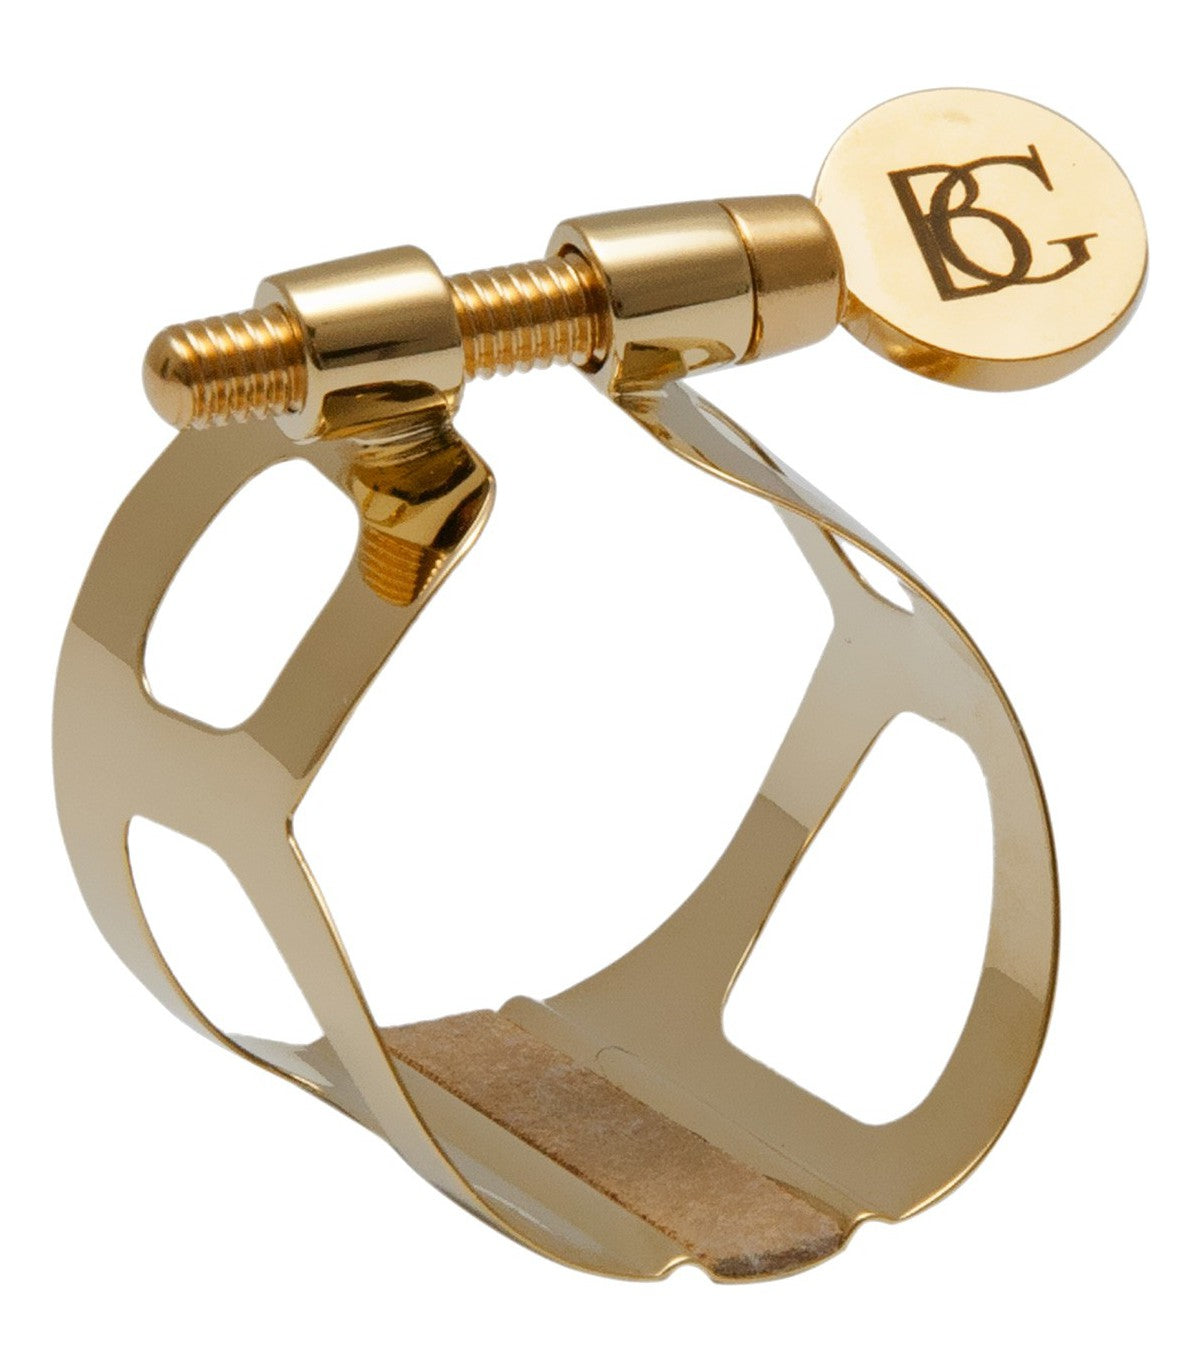 B-flat Clarinet Tradition Ligature Metal - Gold Plated